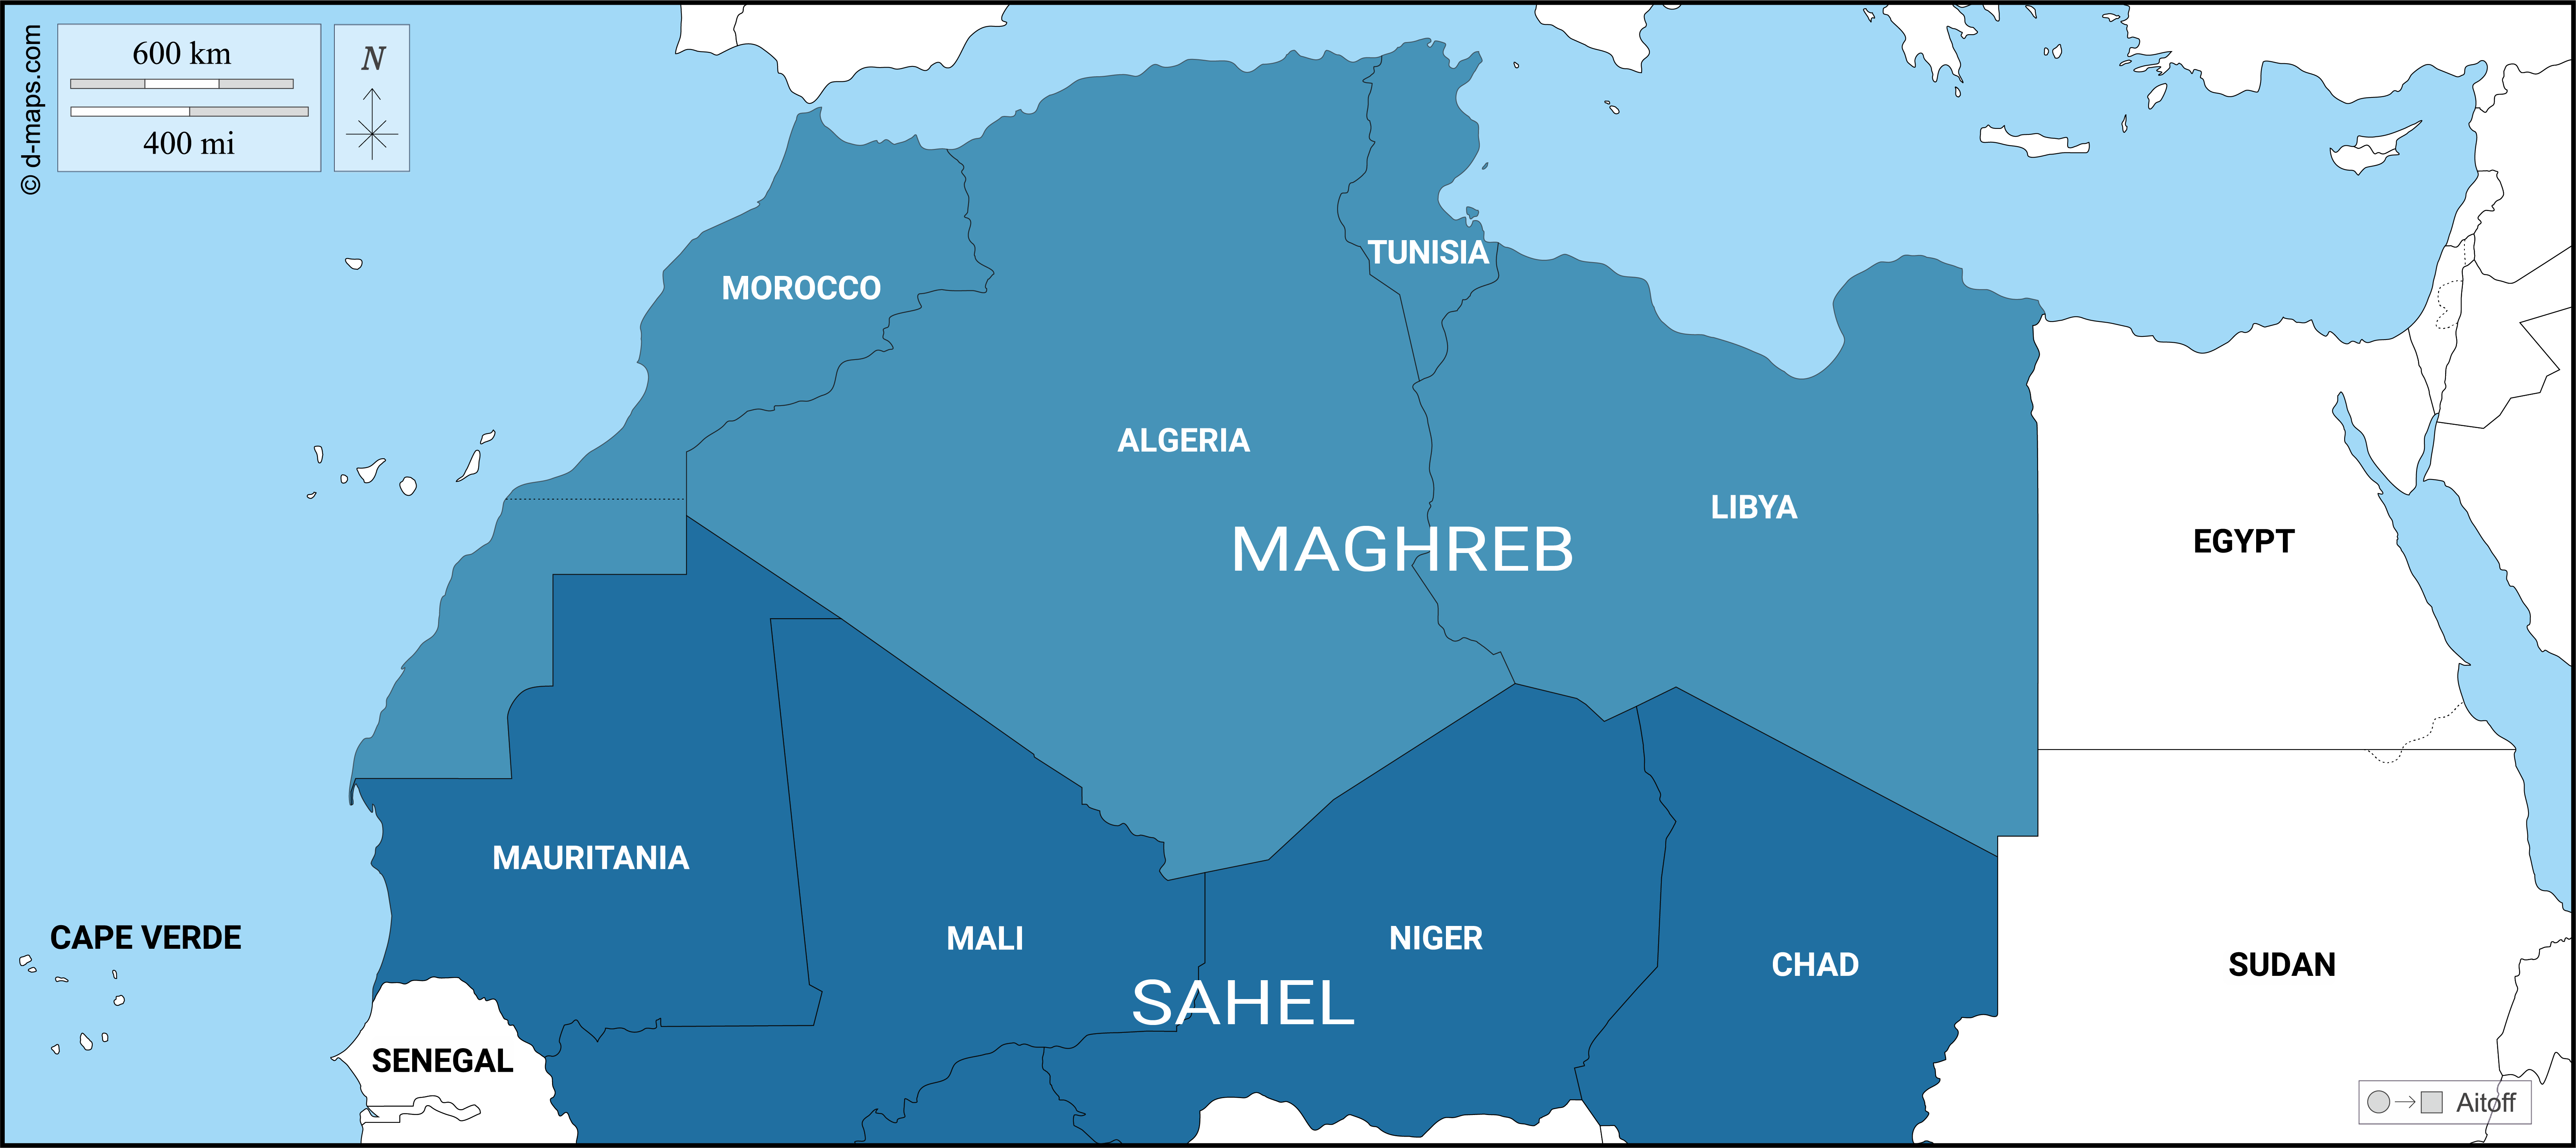 Map of North Africa depicting the Maghreb and Sahel member states